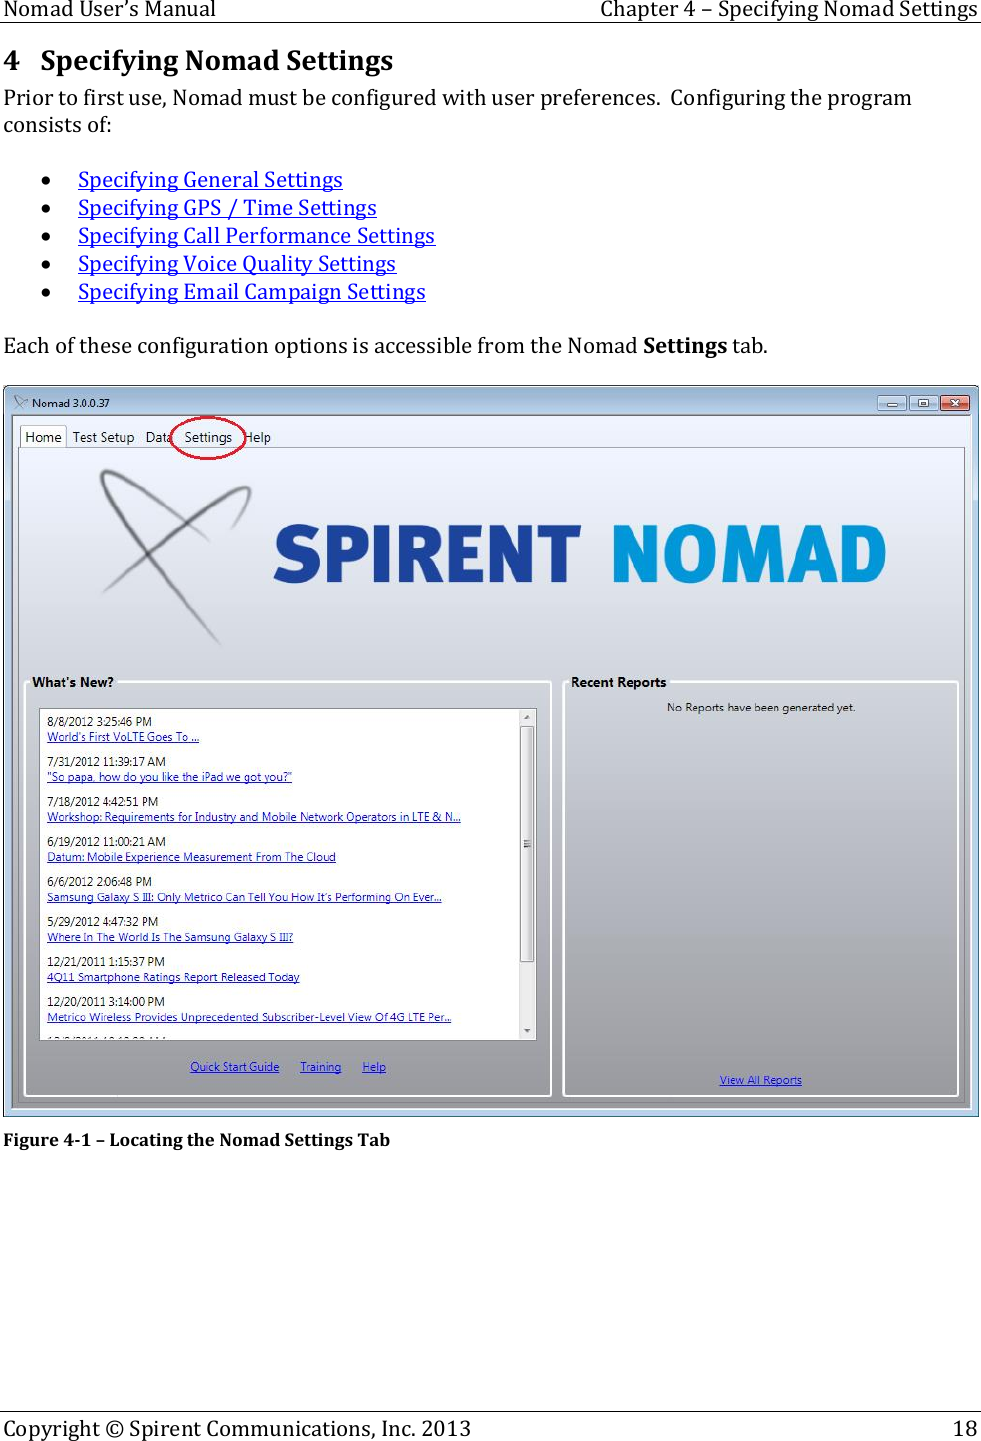  Nomad User’s Manual  Chapter 4 – Specifying Nomad Settings Copyright © Spirent Communications, Inc. 2013    18  4 Specifying Nomad Settings Prior to first use, Nomad must be configured with user preferences.  Configuring the program consists of:   Specifying General Settings  Specifying GPS / Time Settings  Specifying Call Performance Settings  Specifying Voice Quality Settings  Specifying Email Campaign Settings  Each of these configuration options is accessible from the Nomad Settings tab.   Figure 4-1 – Locating the Nomad Settings Tab   